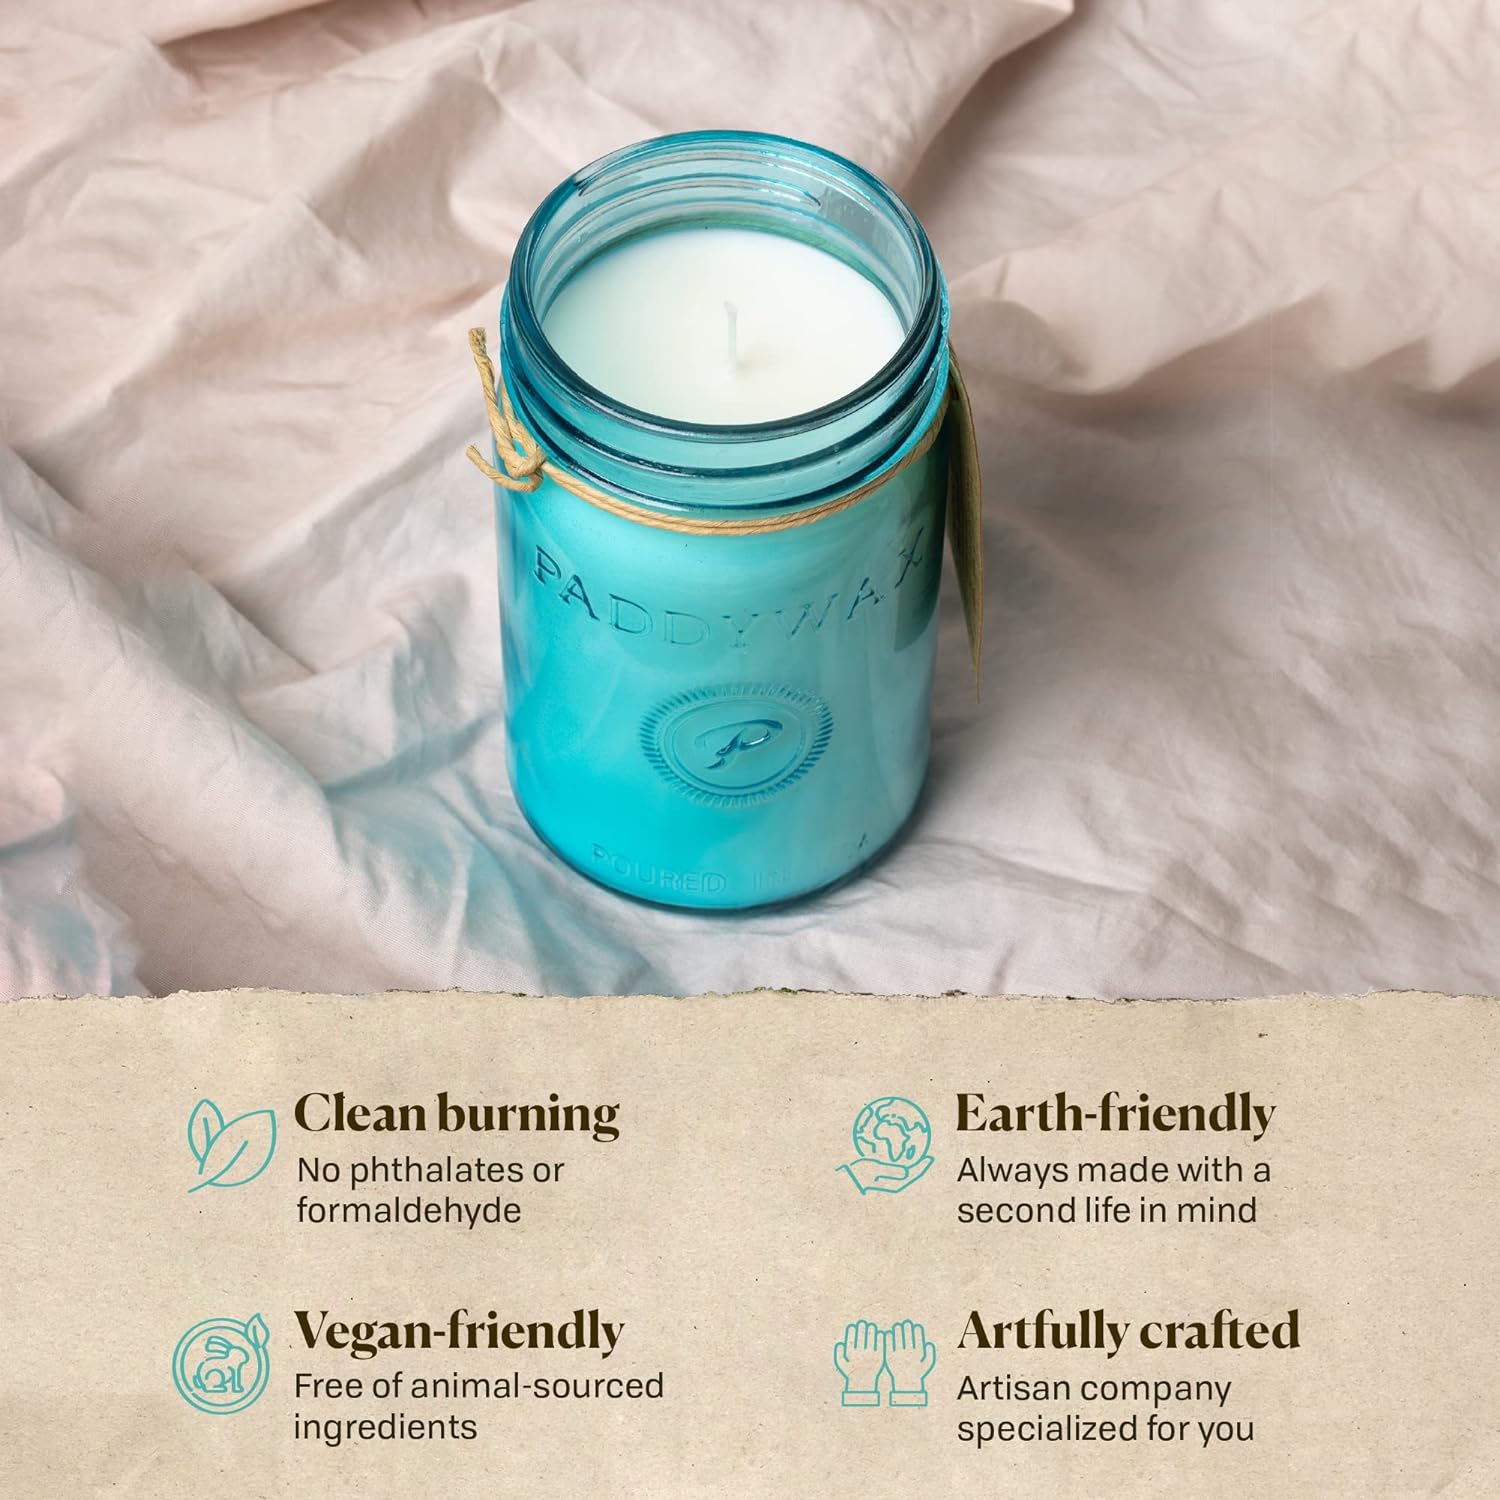 Artisan Soy Wax Candles - Two Sizes